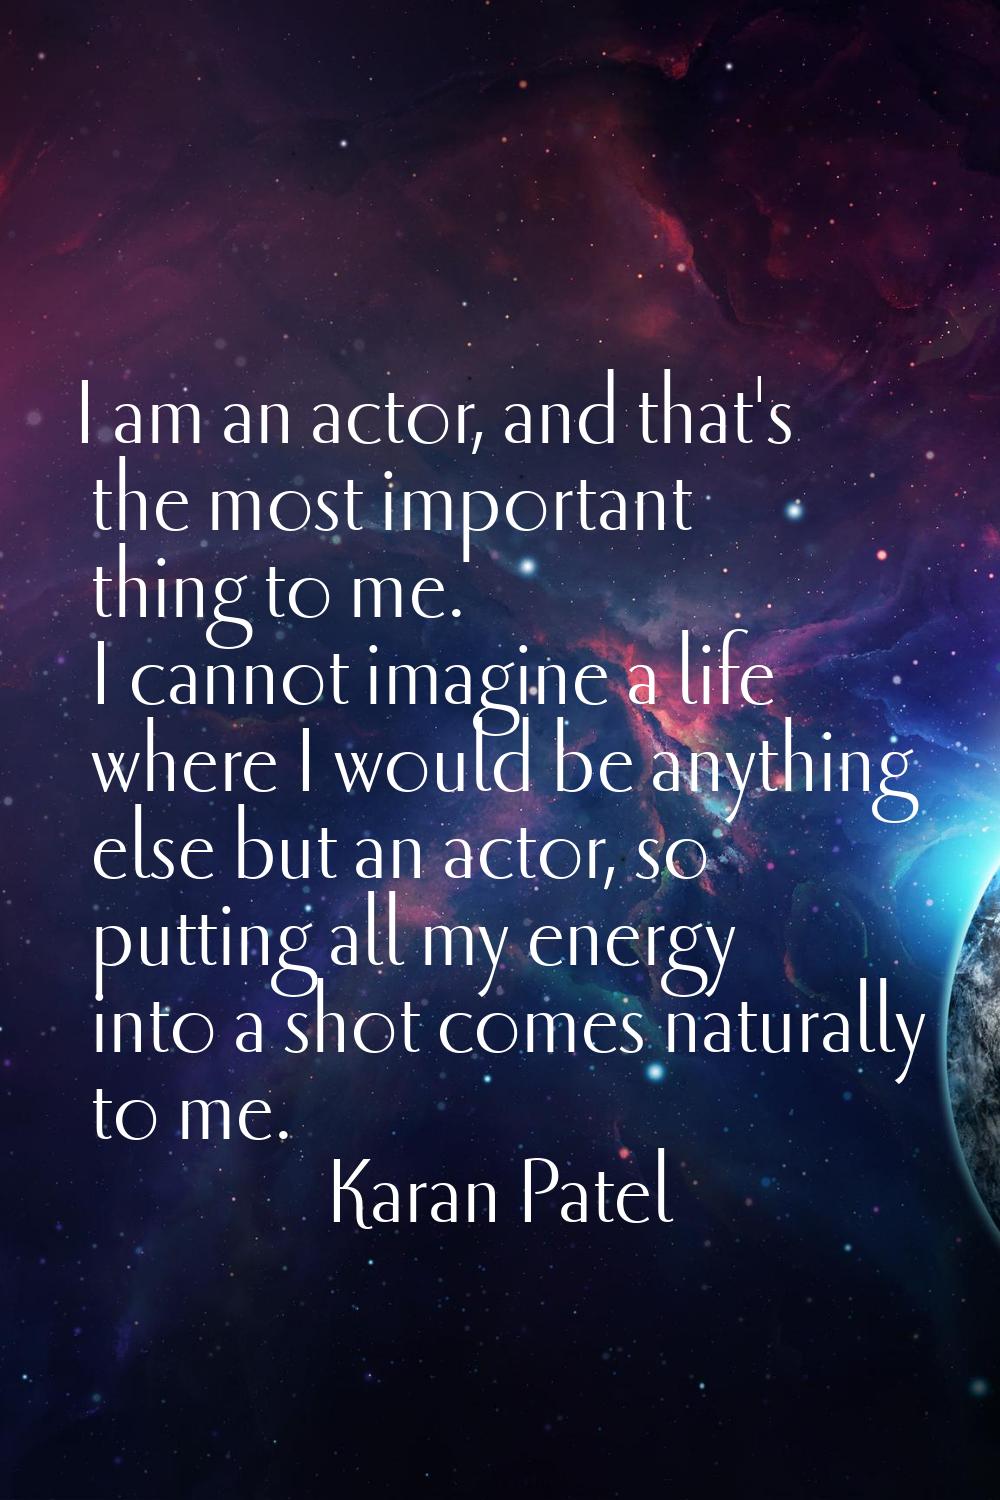 I am an actor, and that's the most important thing to me. I cannot imagine a life where I would be 